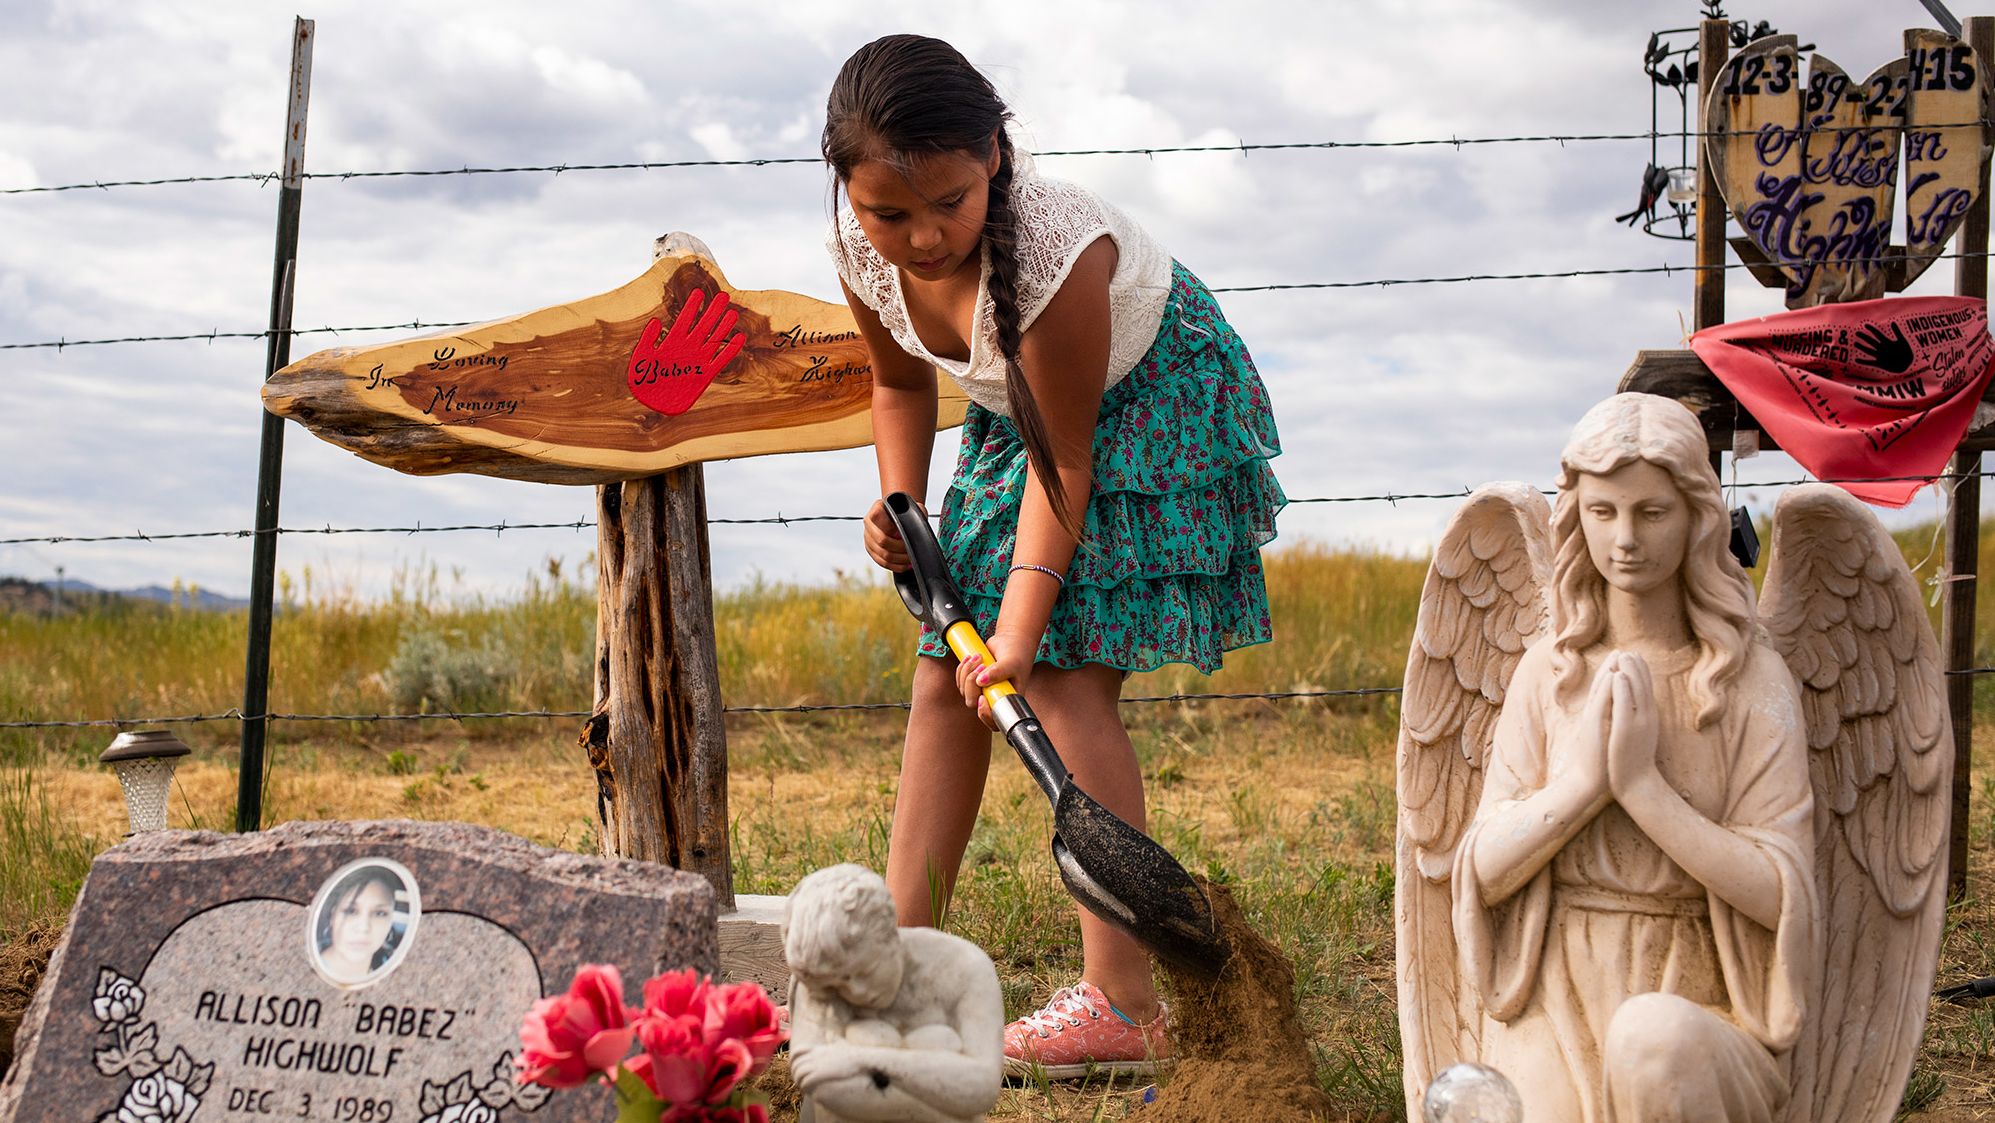 <strong>Tailyr Irvine, based in Missoula, Montana, USA: </strong>Aiyanna, one of four daughters, tends to her mother Allison Highwolf's grave in Busby, Montana, a town on the Northern Cheyenne Reservation. As Elizabeth Williamson <a href="https://www.nytimes.com/2021/07/11/us/politics/allison-highwolf-indian-country.html" target="_blank" target="_blank">reported for The New York Times:</a> Allison Highwolf's body was 'found alone in a motel room in February 2015. She died at 26 years old of smoke inhalation from a fire of unclear origin ... Six years later, the circumstances of Highwolf's death remains a mystery, one of many involving Native women who disappear or meet violent ends with alarming regularity.'<br /> <br />I met with the family and spent the day hearing about Allison and the case. That afternoon they planned to visit her grave to place a grave marker. I asked if I could attend and they graciously let me observe and photograph. I tried my best to keep a distance during their time at the grave to respect their privacy.<br /> <br />It's hard to visualize grief and loss but every time I look at this photo I am hit with the loss I feel for Aiyanna and her family. We hear a lot about the <a href="https://www.nativehope.org/en-us/understanding-the-issue-of-missing-and-murdered-indigenous-women" target="_blank" target="_blank">Missing and Murdered Indigenous Women</a> crisis but we rarely see the aftermath, the path of destruction unsolved cases leave.